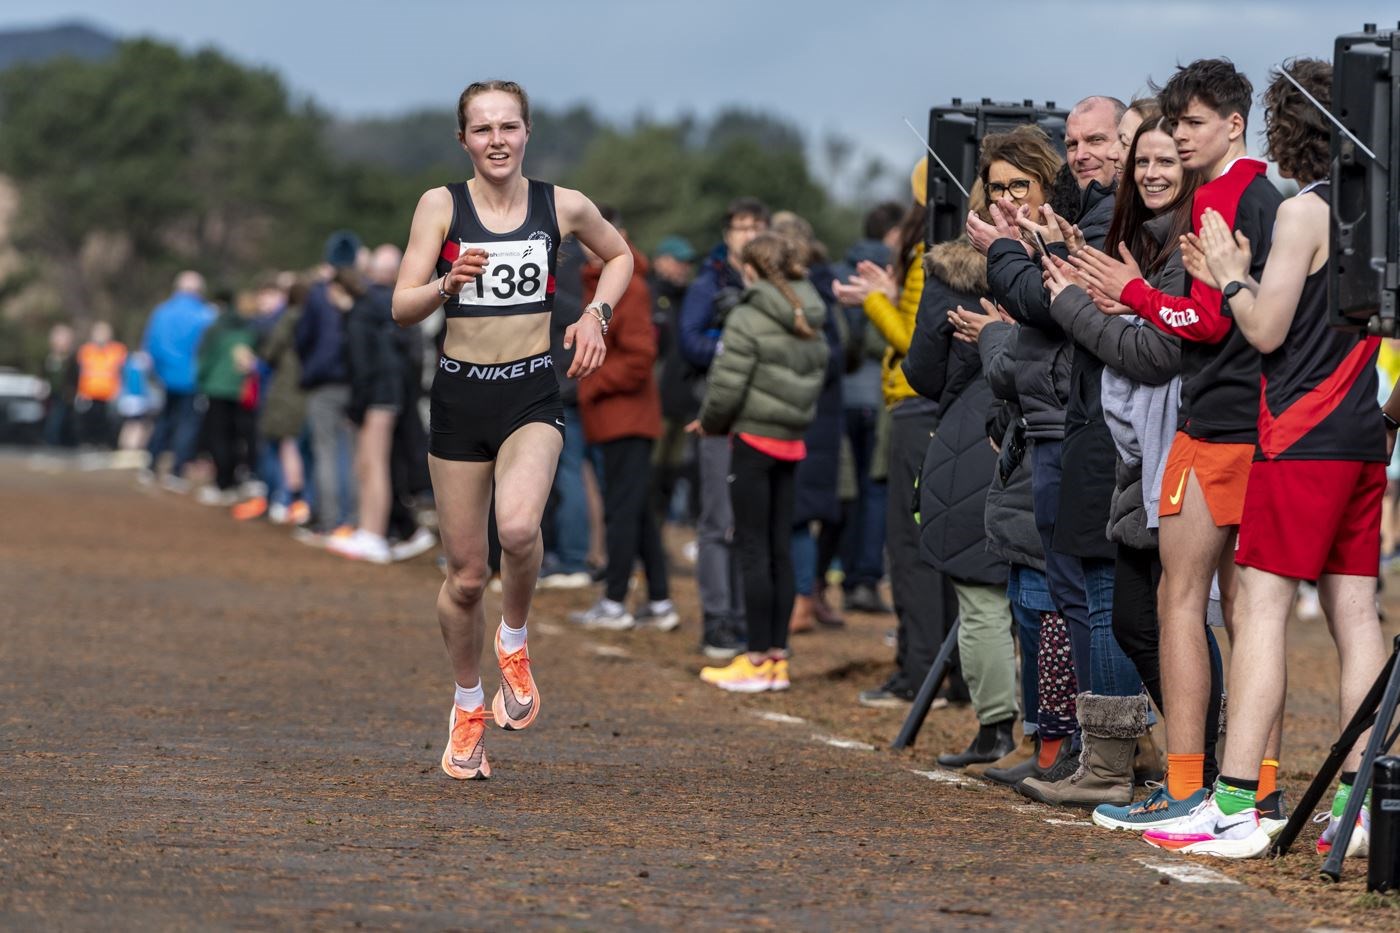 Ross County Athletics Club's Caitlyn Heggie continued her string of successes by winning the under-17 girls' race at the Young Athletes Road Races 2023, earning a spot in the London Mini Marathon in the process. Picture: Bobby Gavin